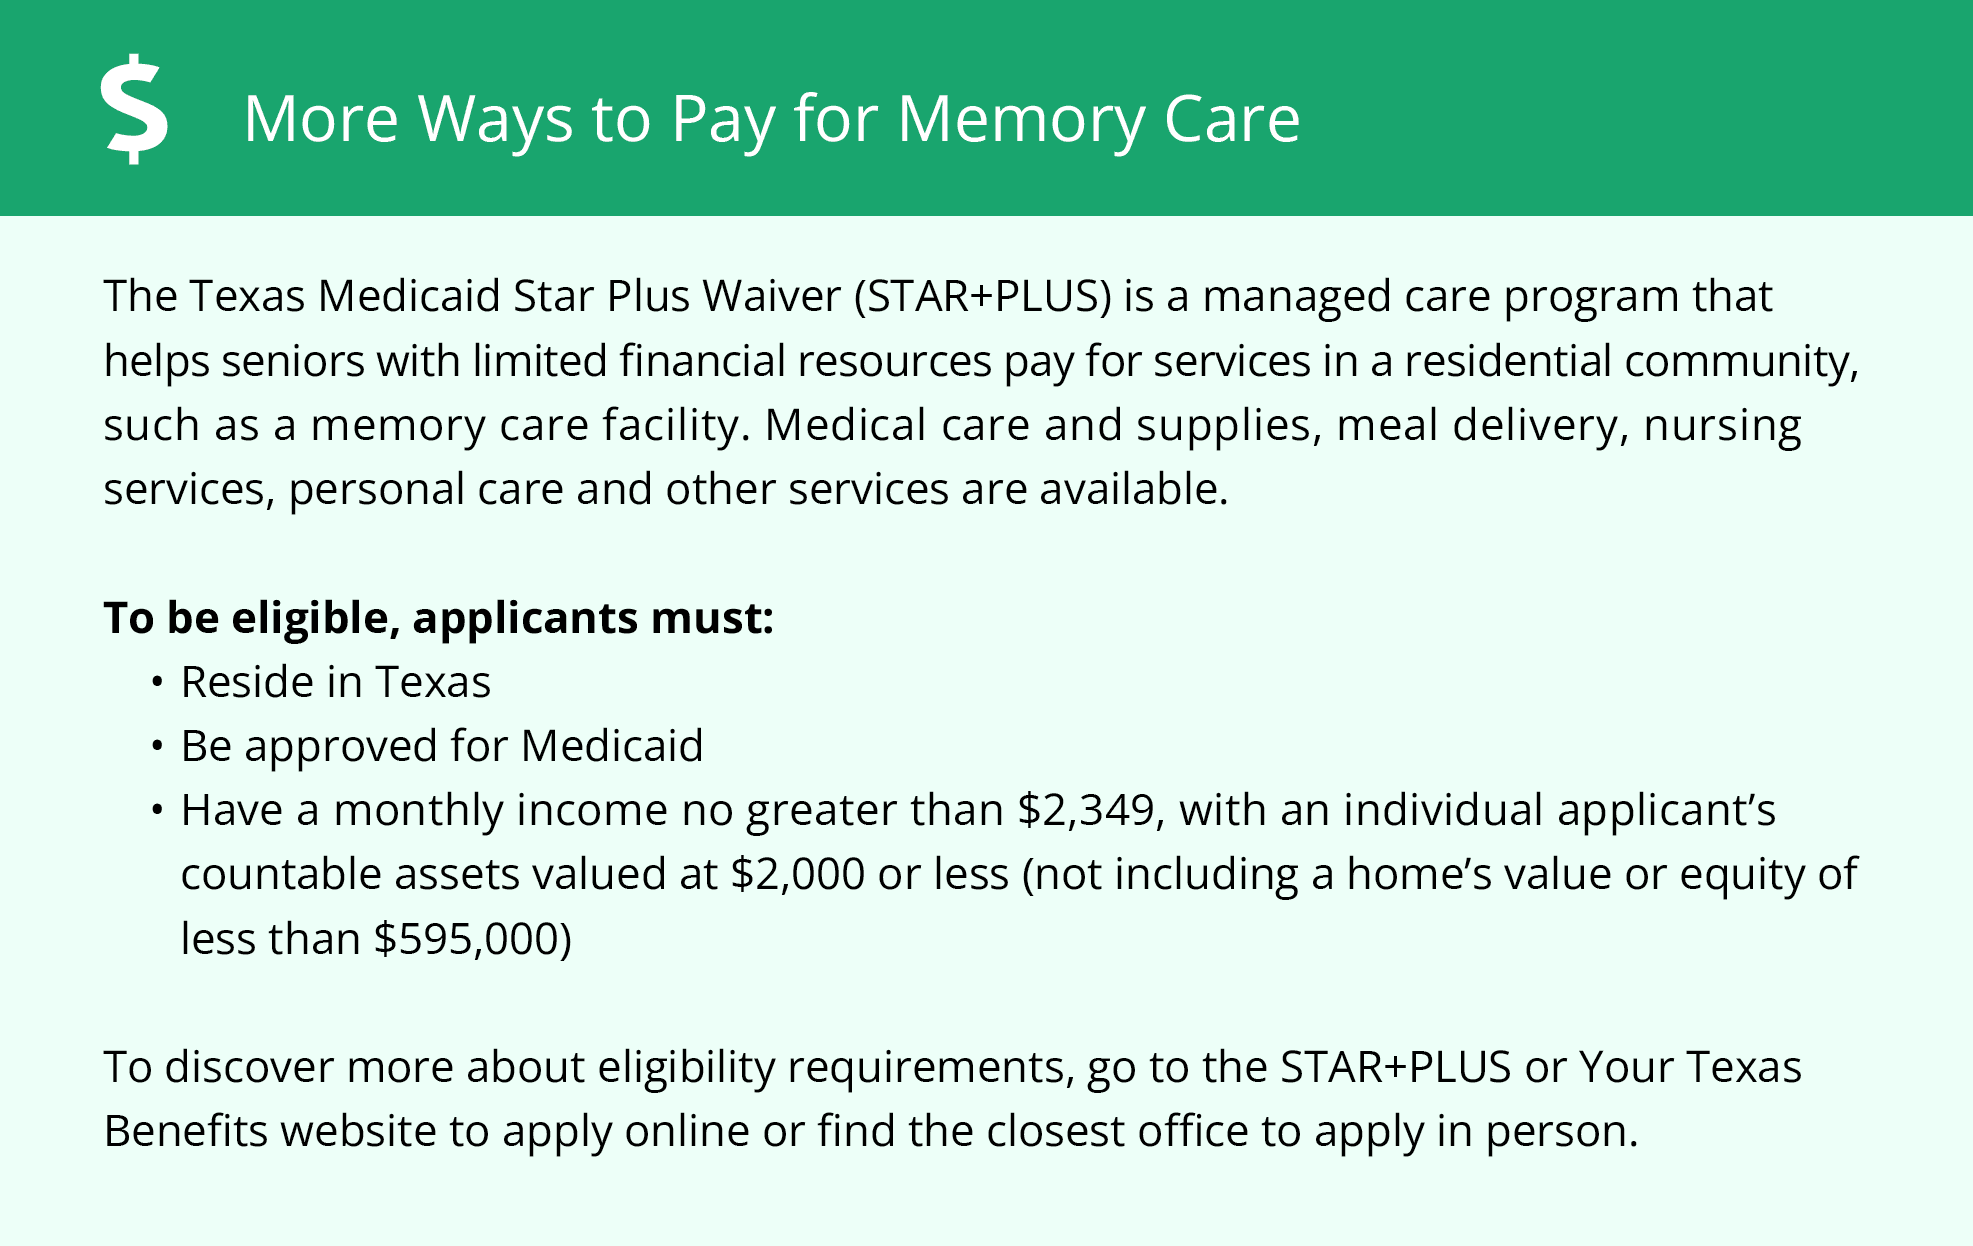 More Ways to Pay for Memory Care - Texas